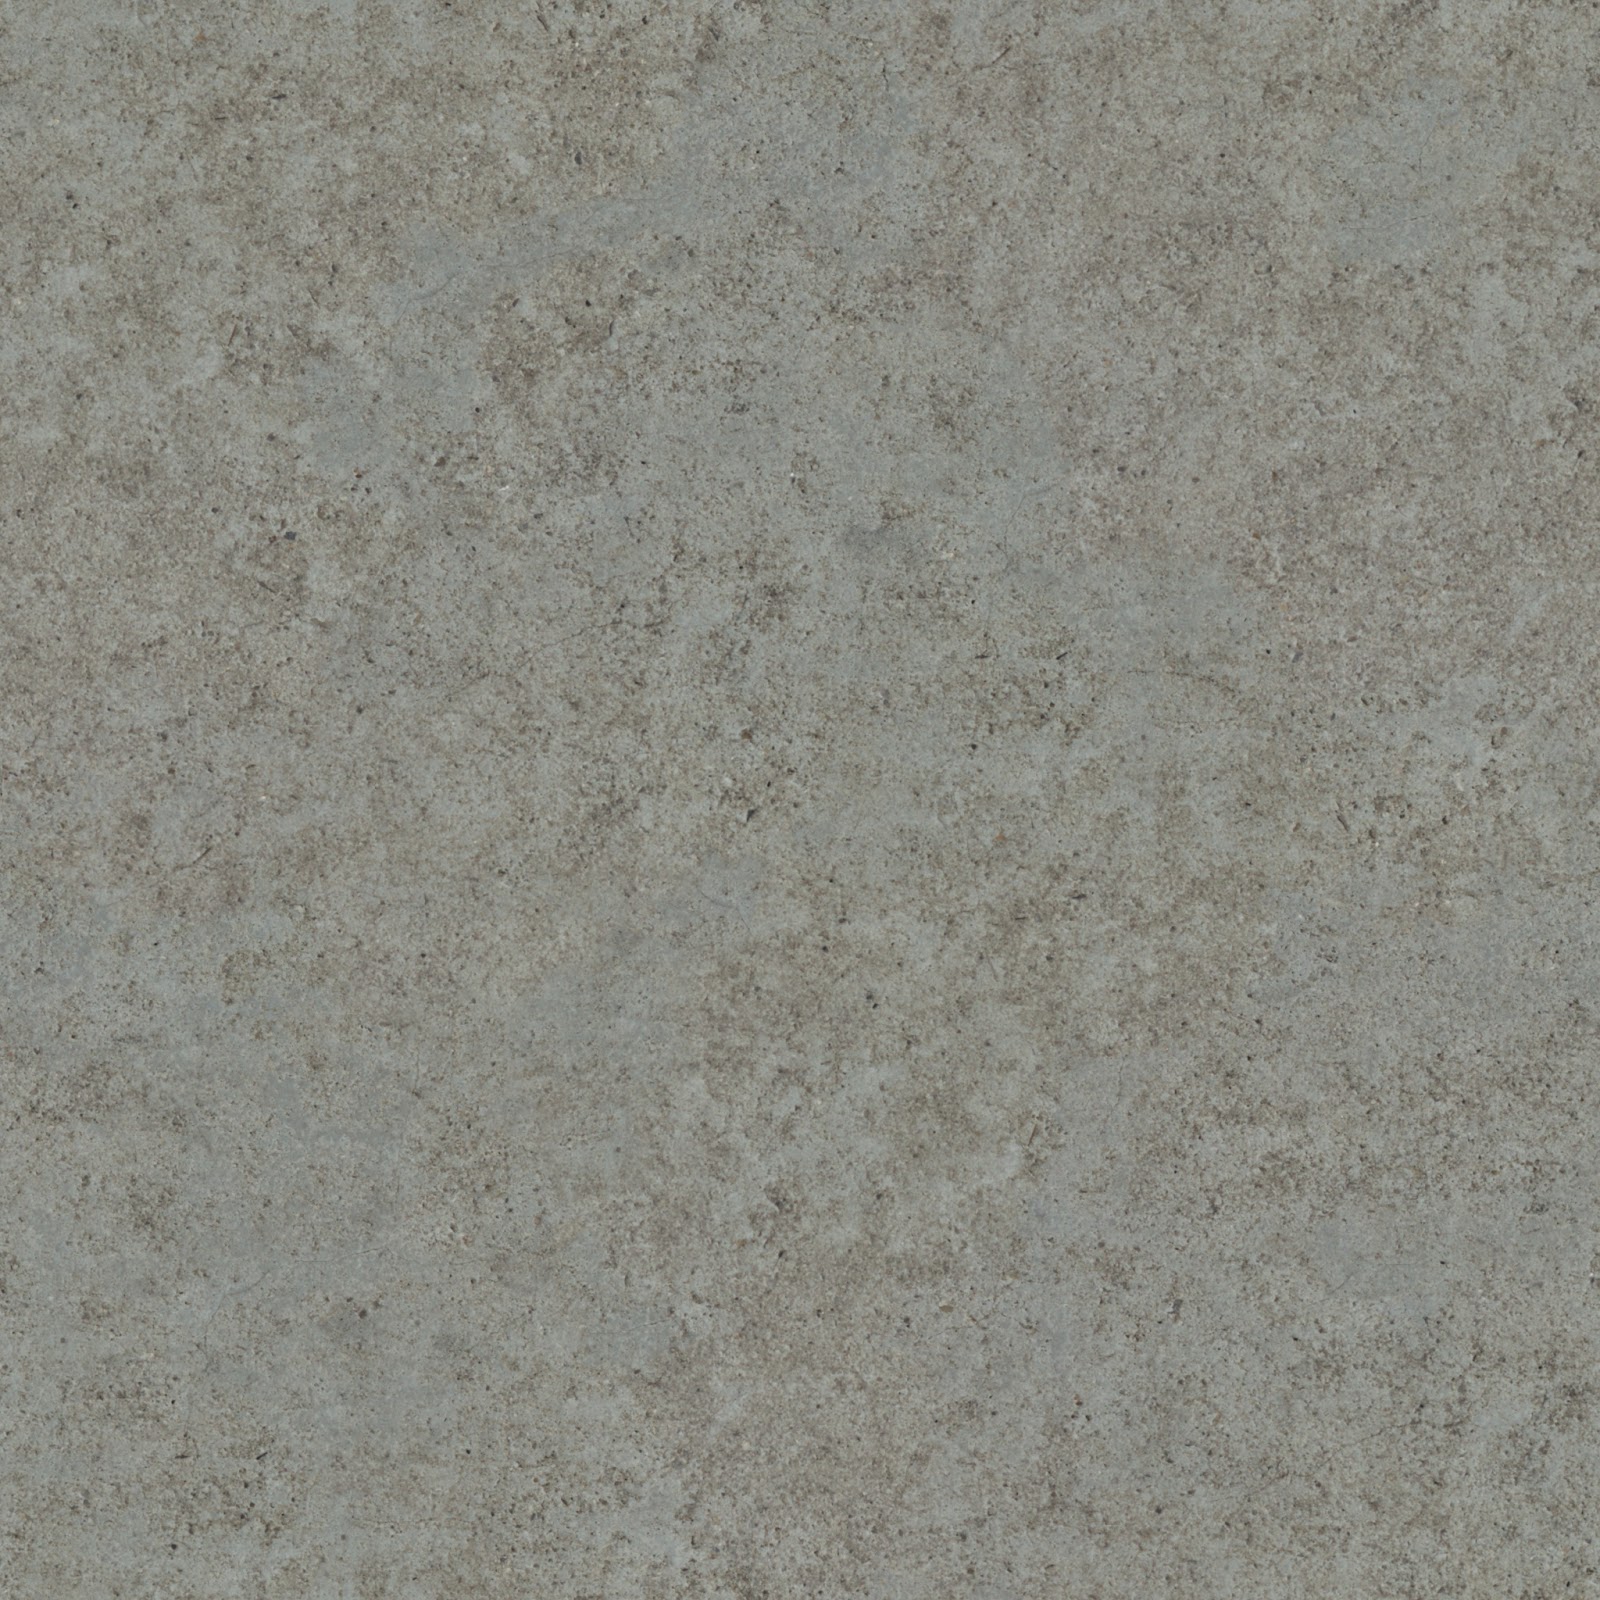 High Resolution Seamless Textures: (Concrete 8) granite wall smooth ...